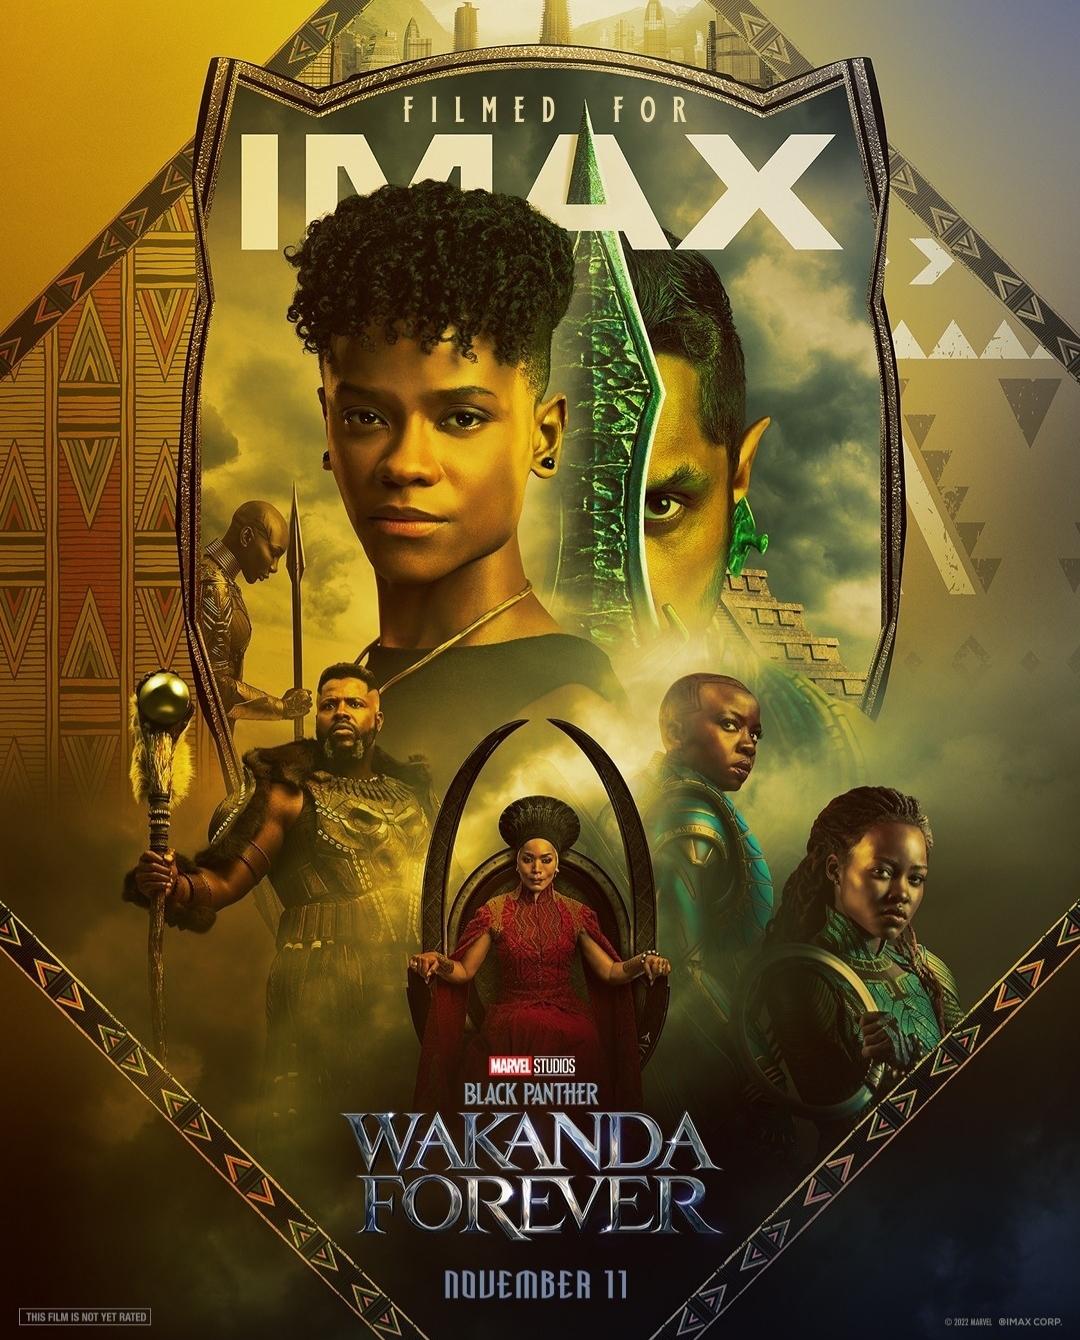 Black Panther Wakanda forever poster & trailers (Imax)